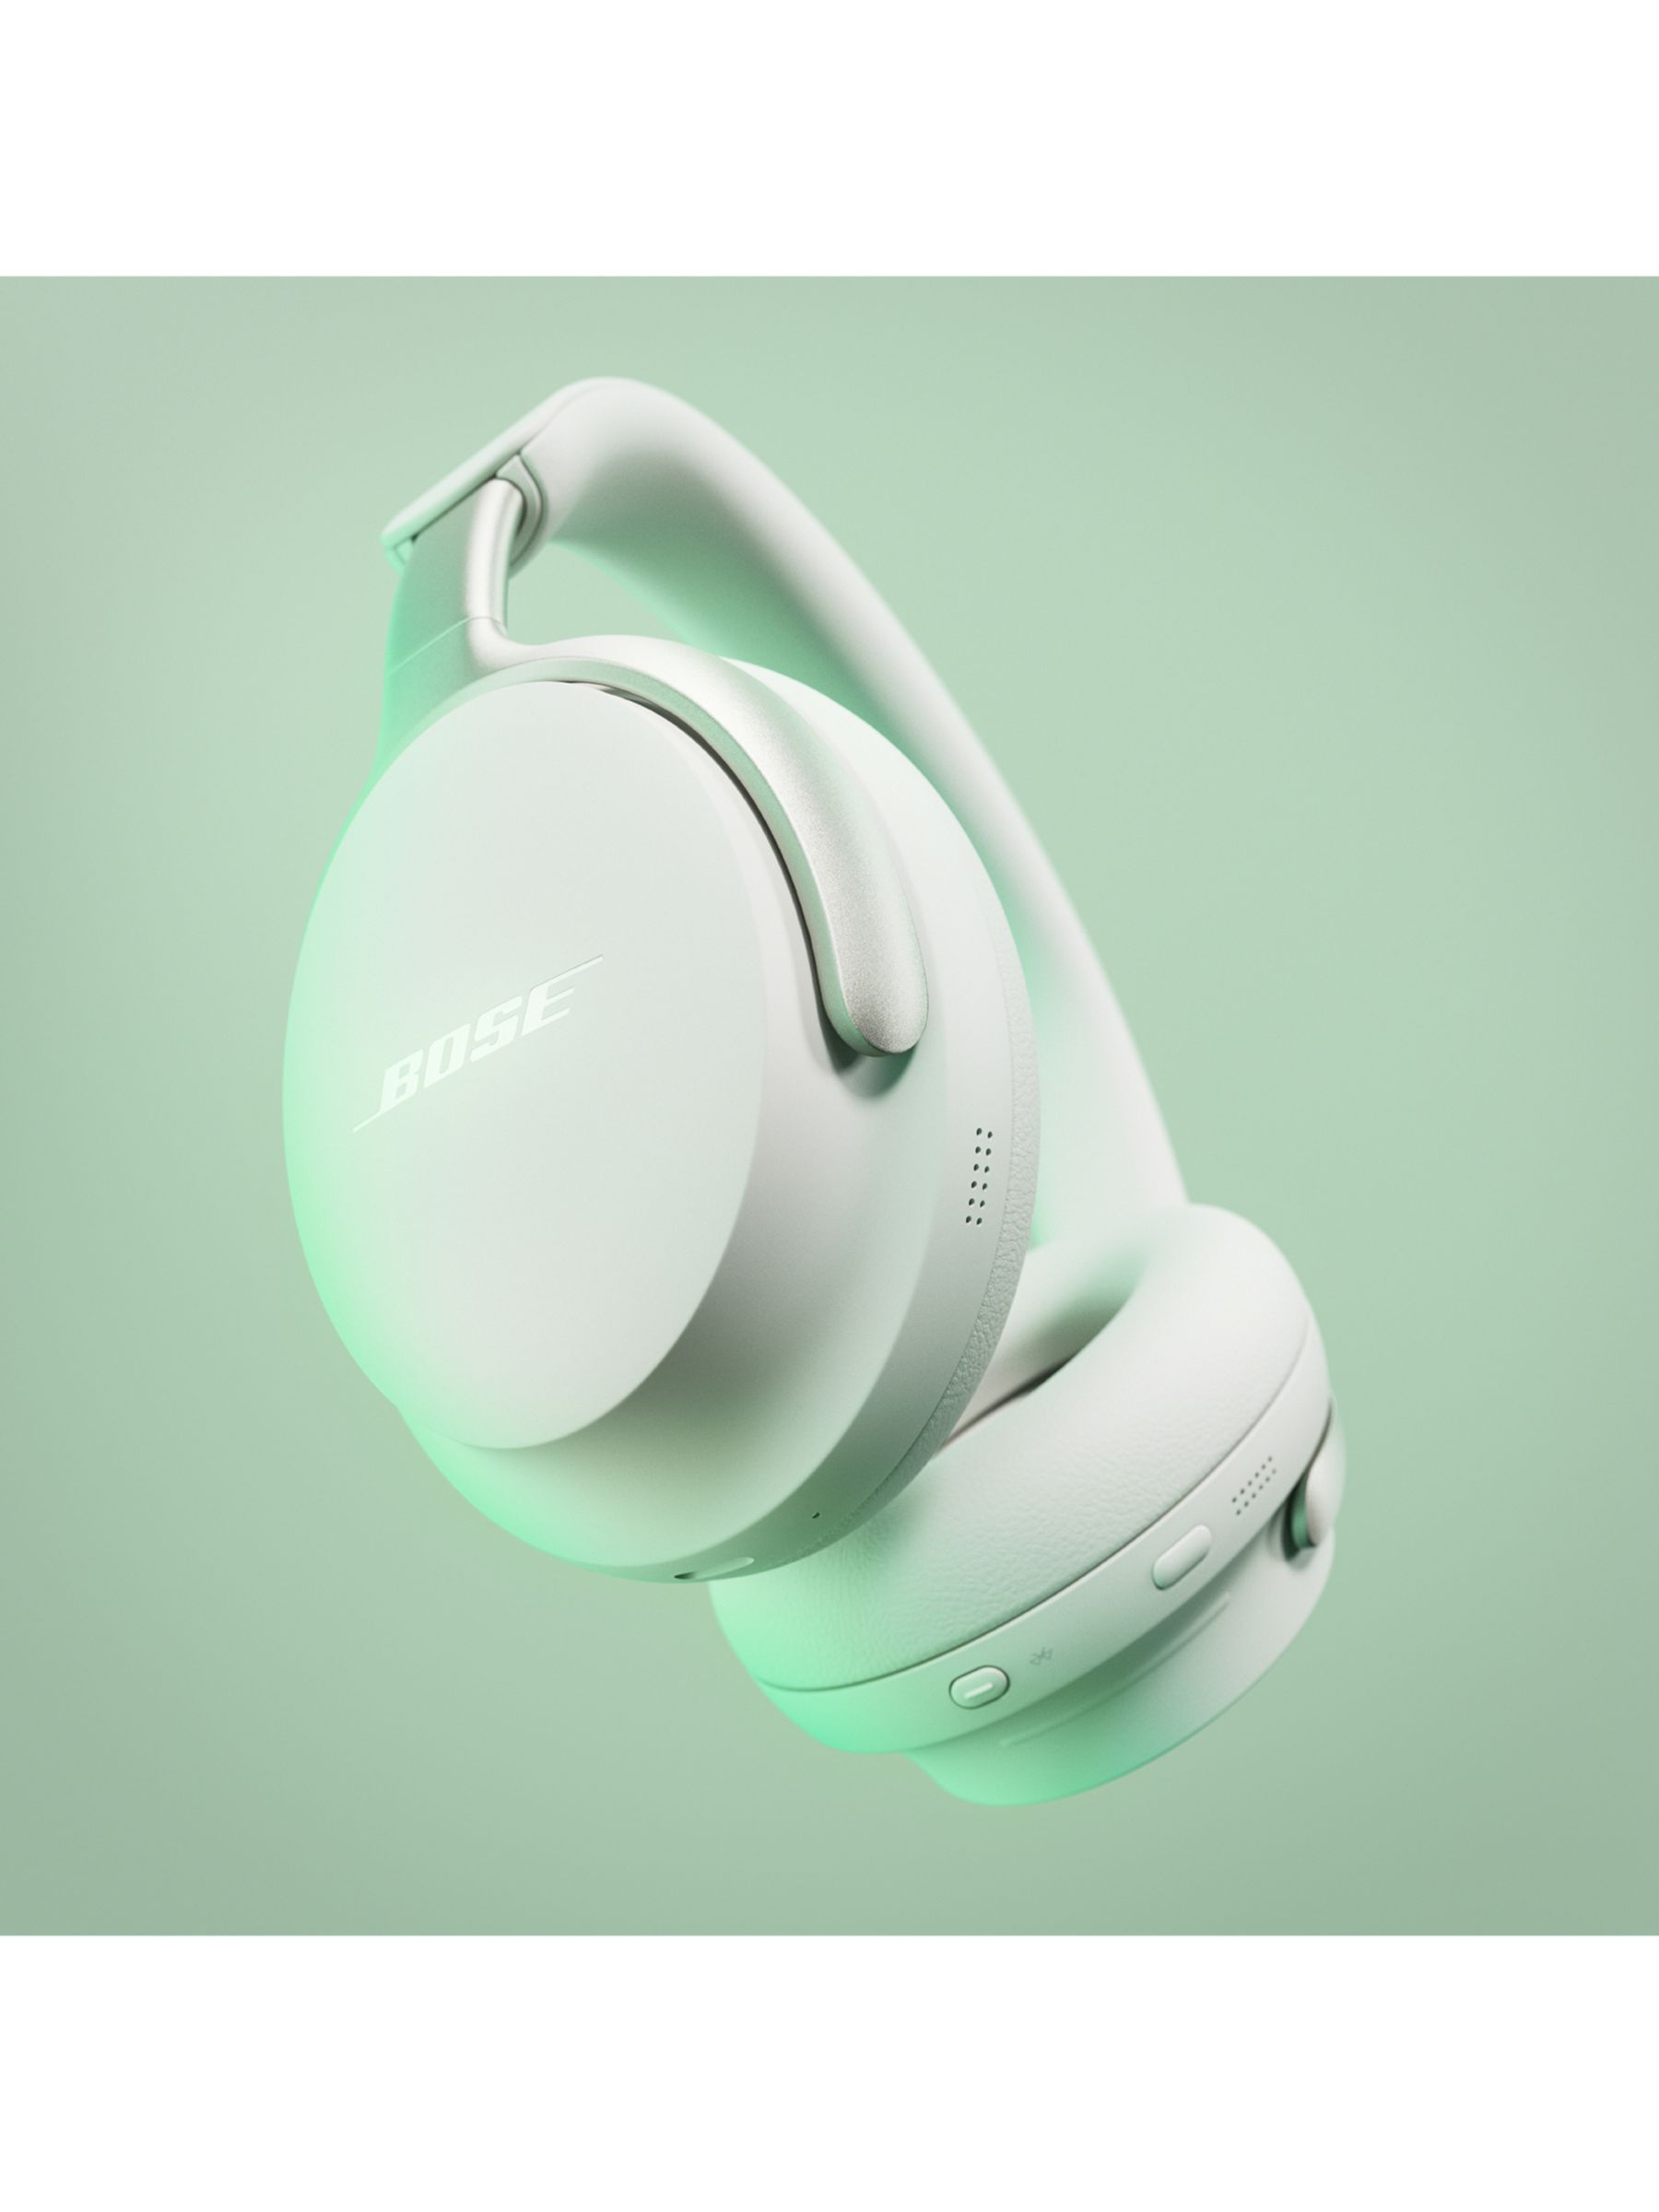 Bose QuietComfort Ultra Noise Cancelling Over-Ear Wireless Bluetooth  Headphones with Mic/Remote, White Smoke